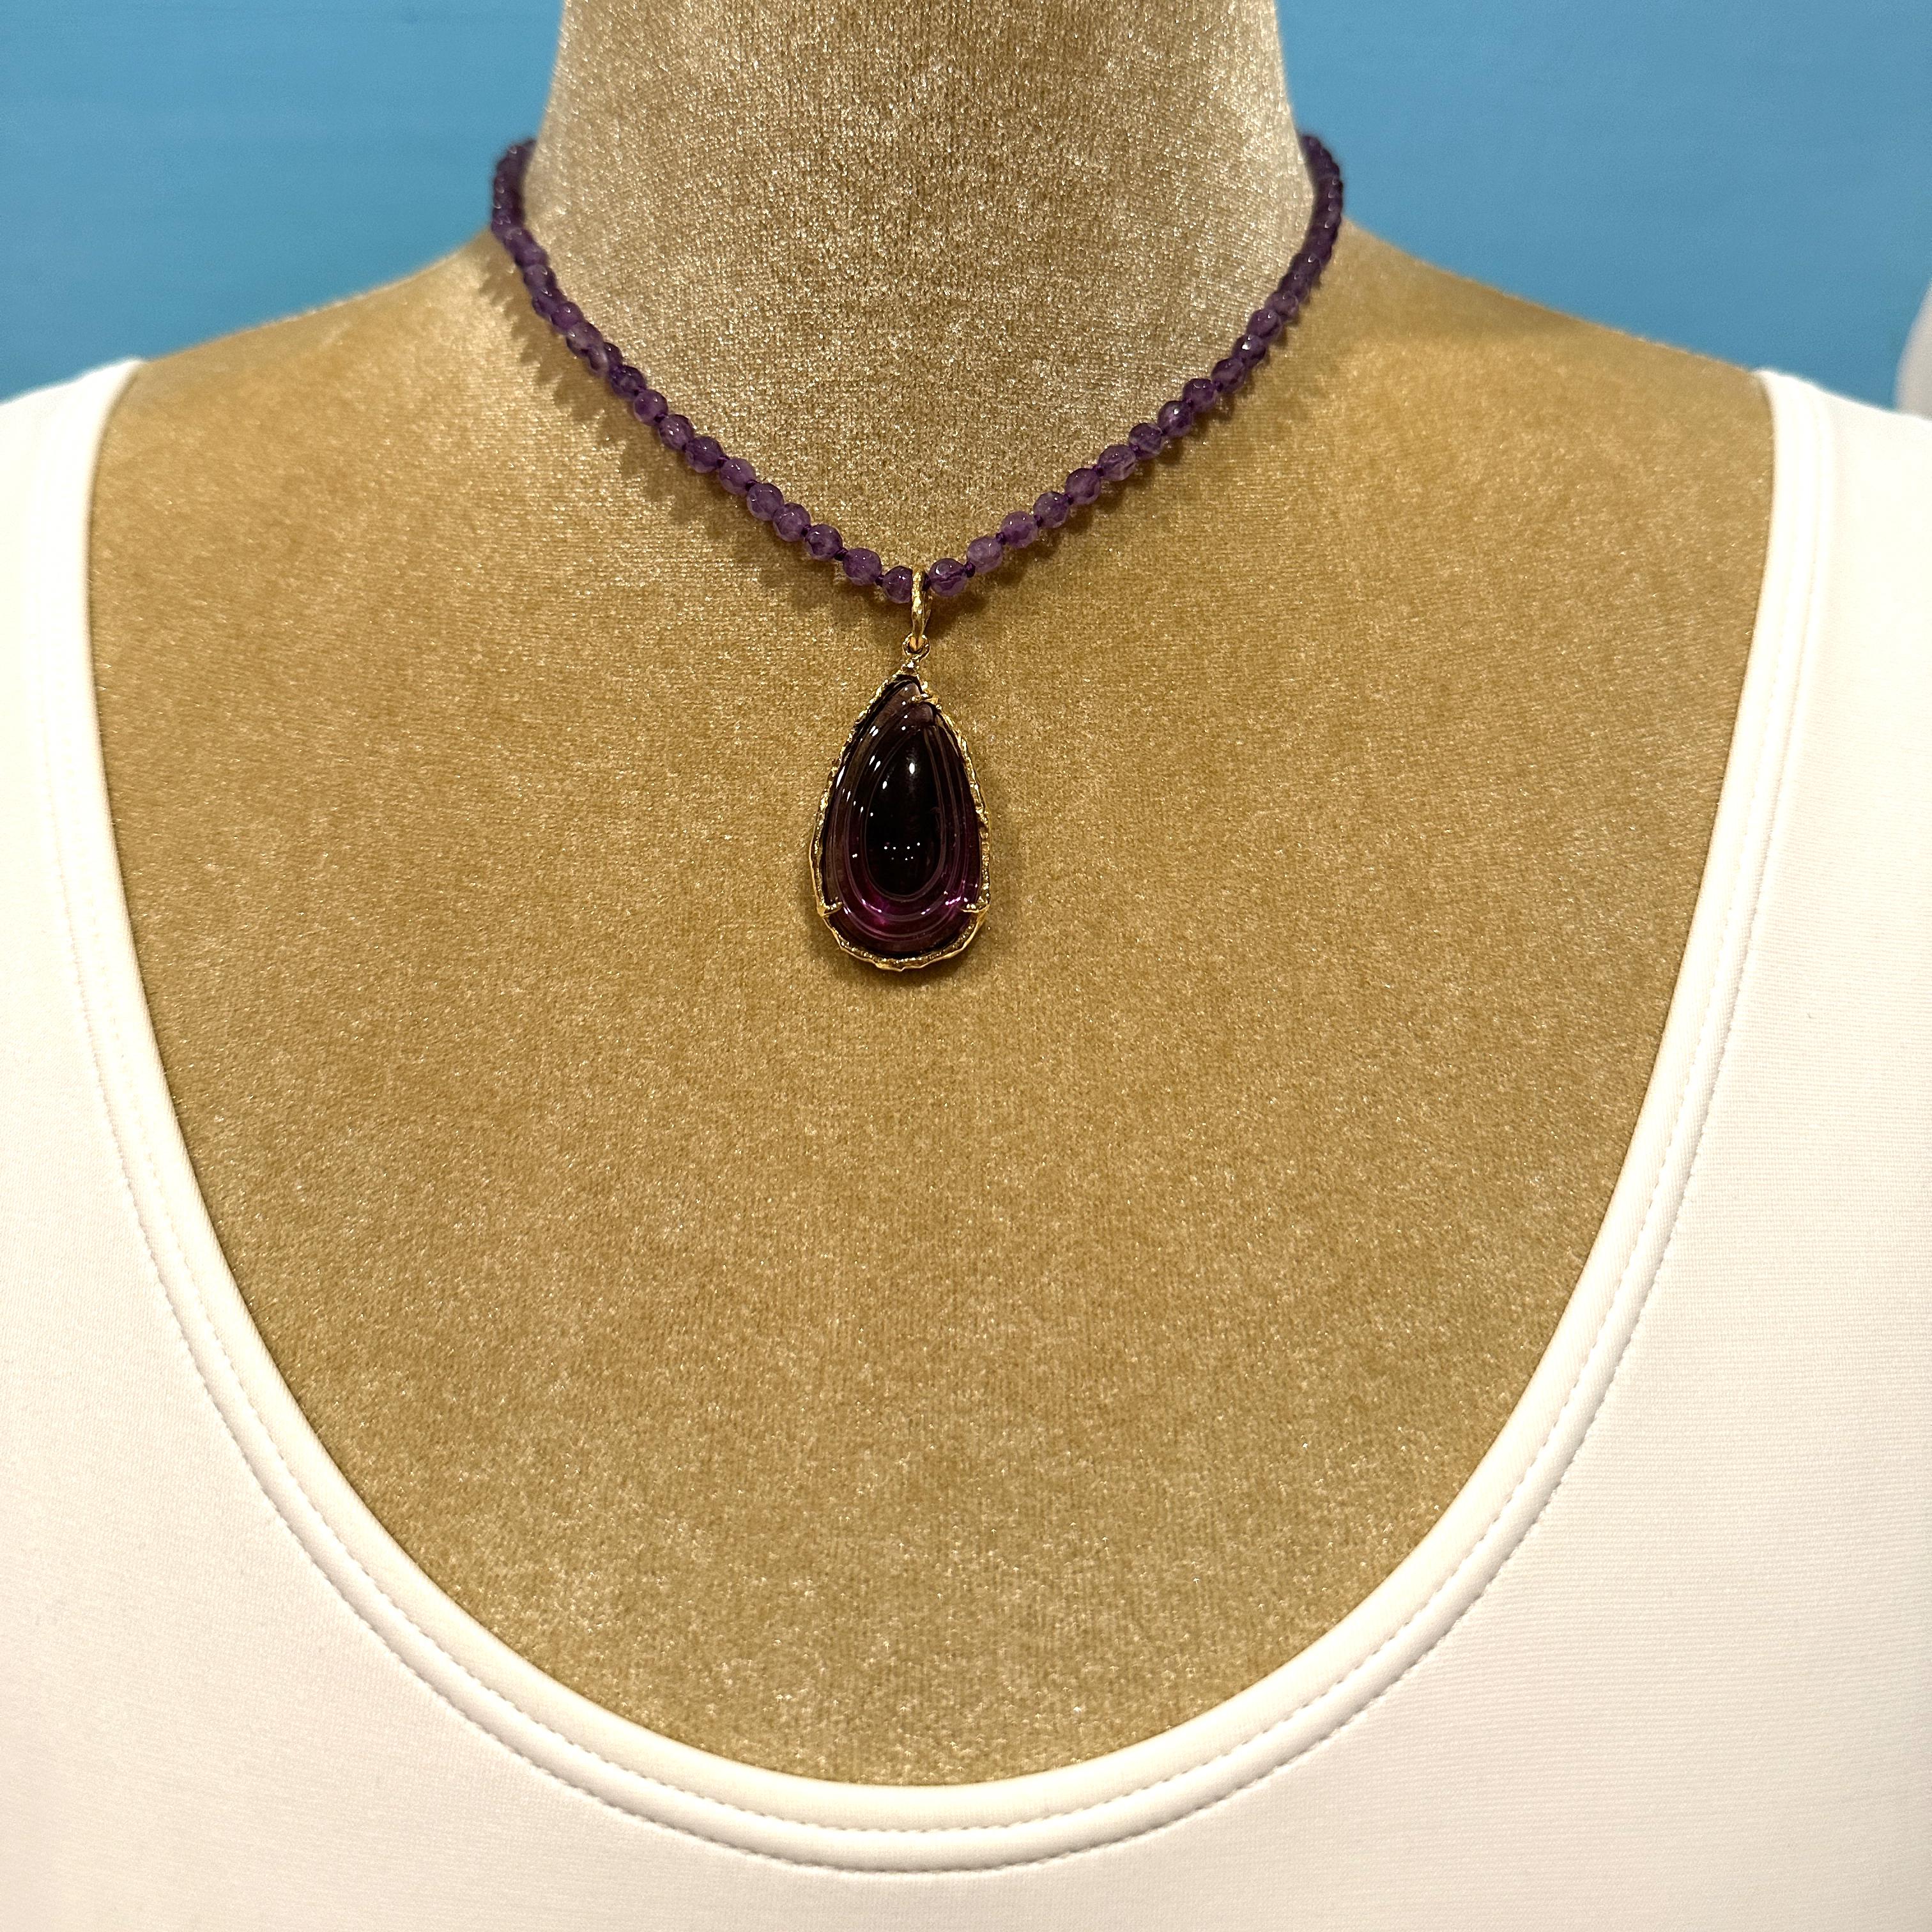 39 Carat Carved Amethyst Pendant in 18K Gold on Convertible Amethyst Bead Chain In New Condition For Sale In Sherman Oaks, CA